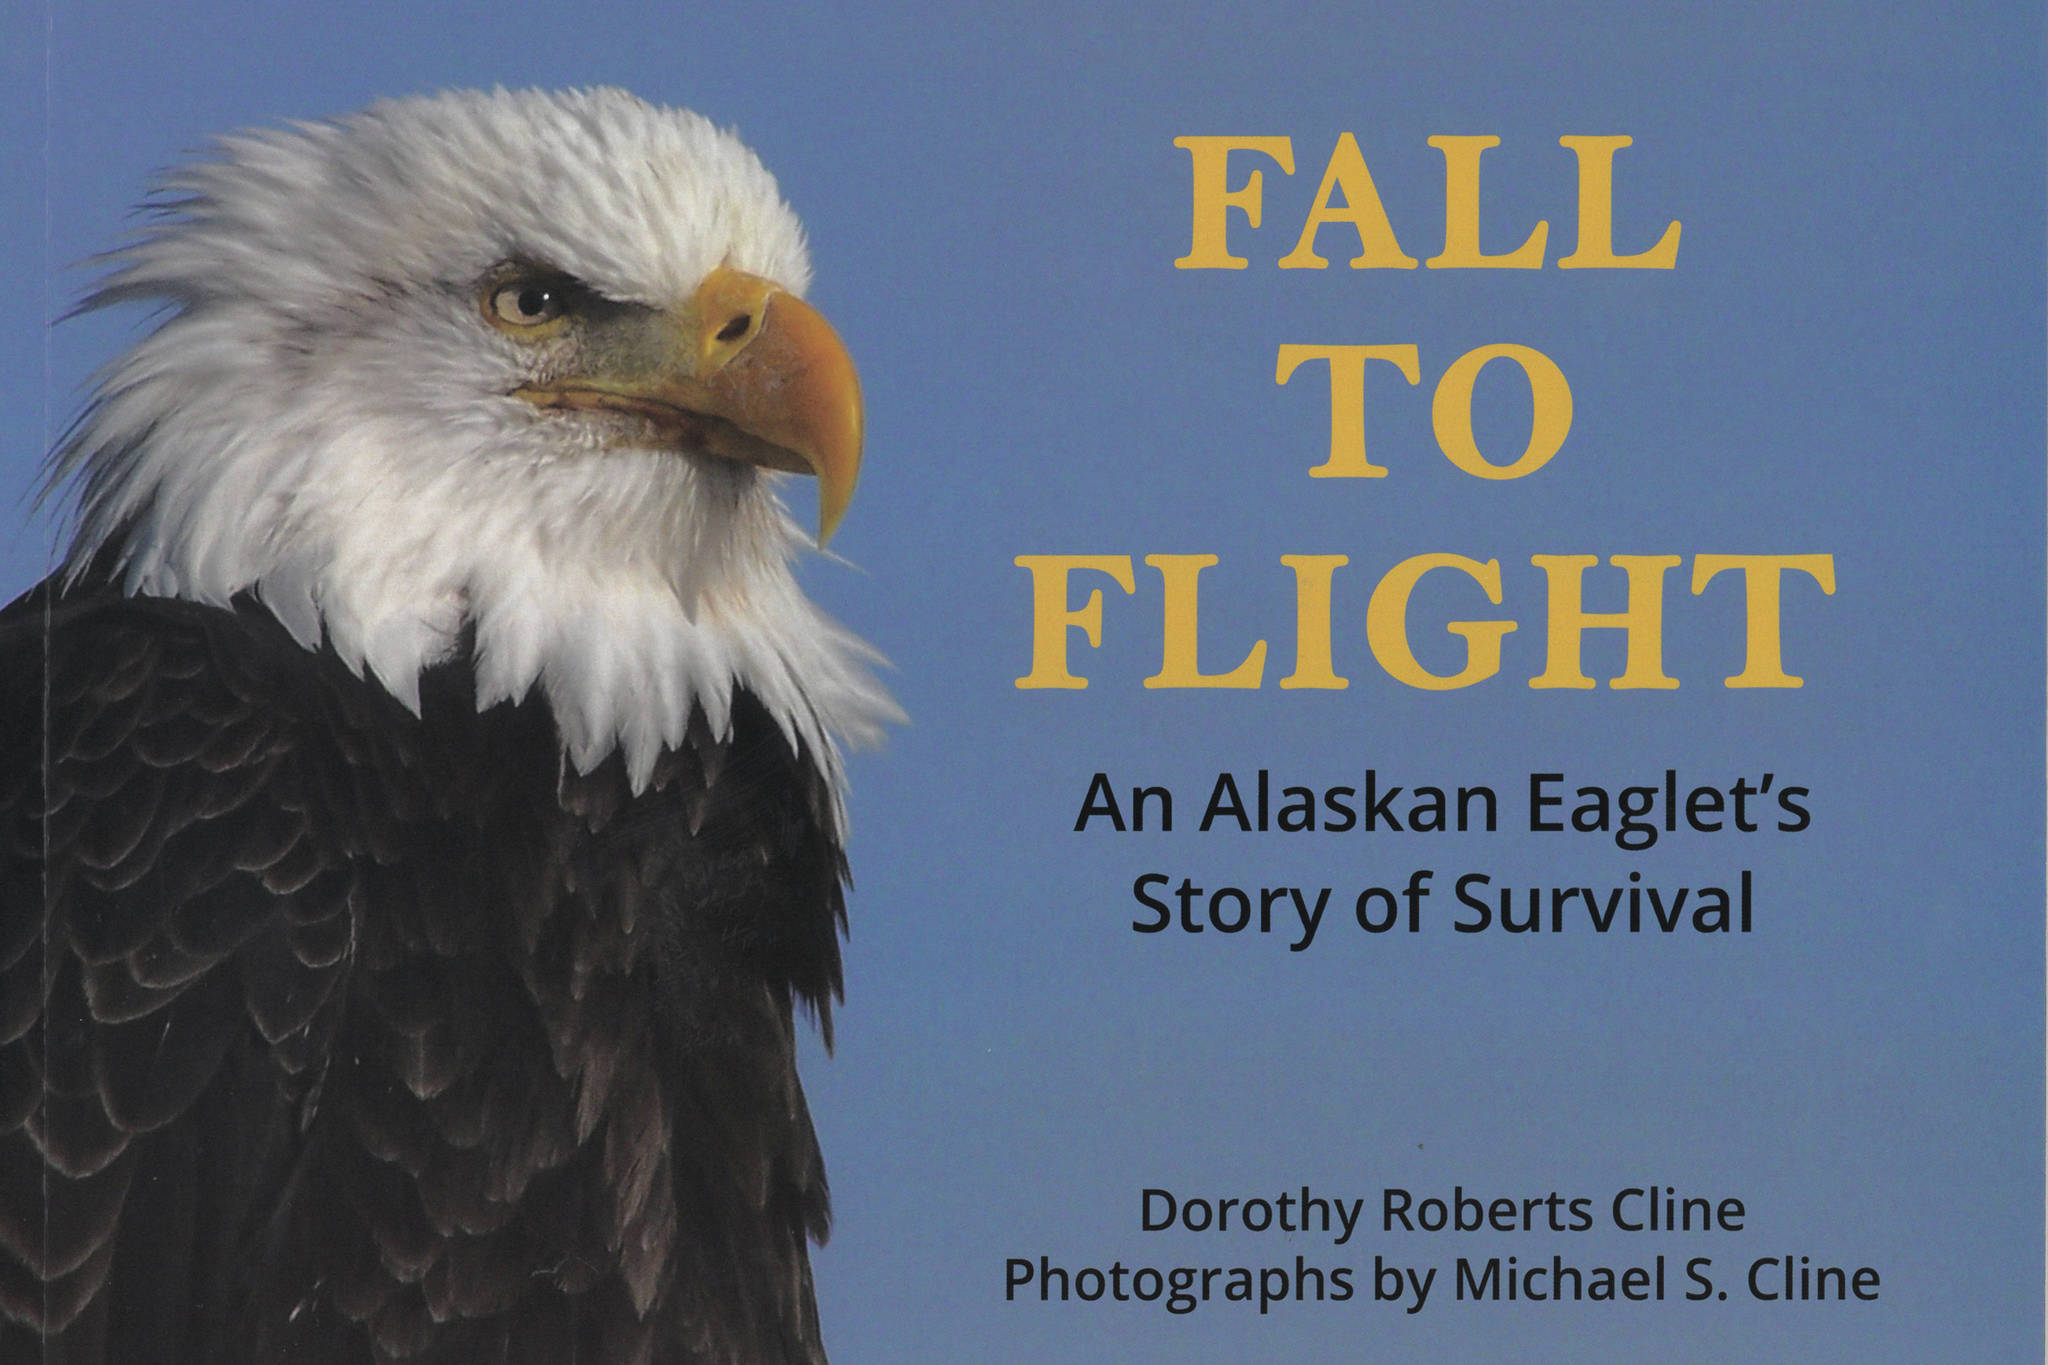 The cover to Dorothy Roberts Cline's book, "Fall to Flight: An Alaskan Eaglet's Story of Survival," uses a photo by the late Michael S. Cline. (Image courtesy of Dorothy Roberts Cline)